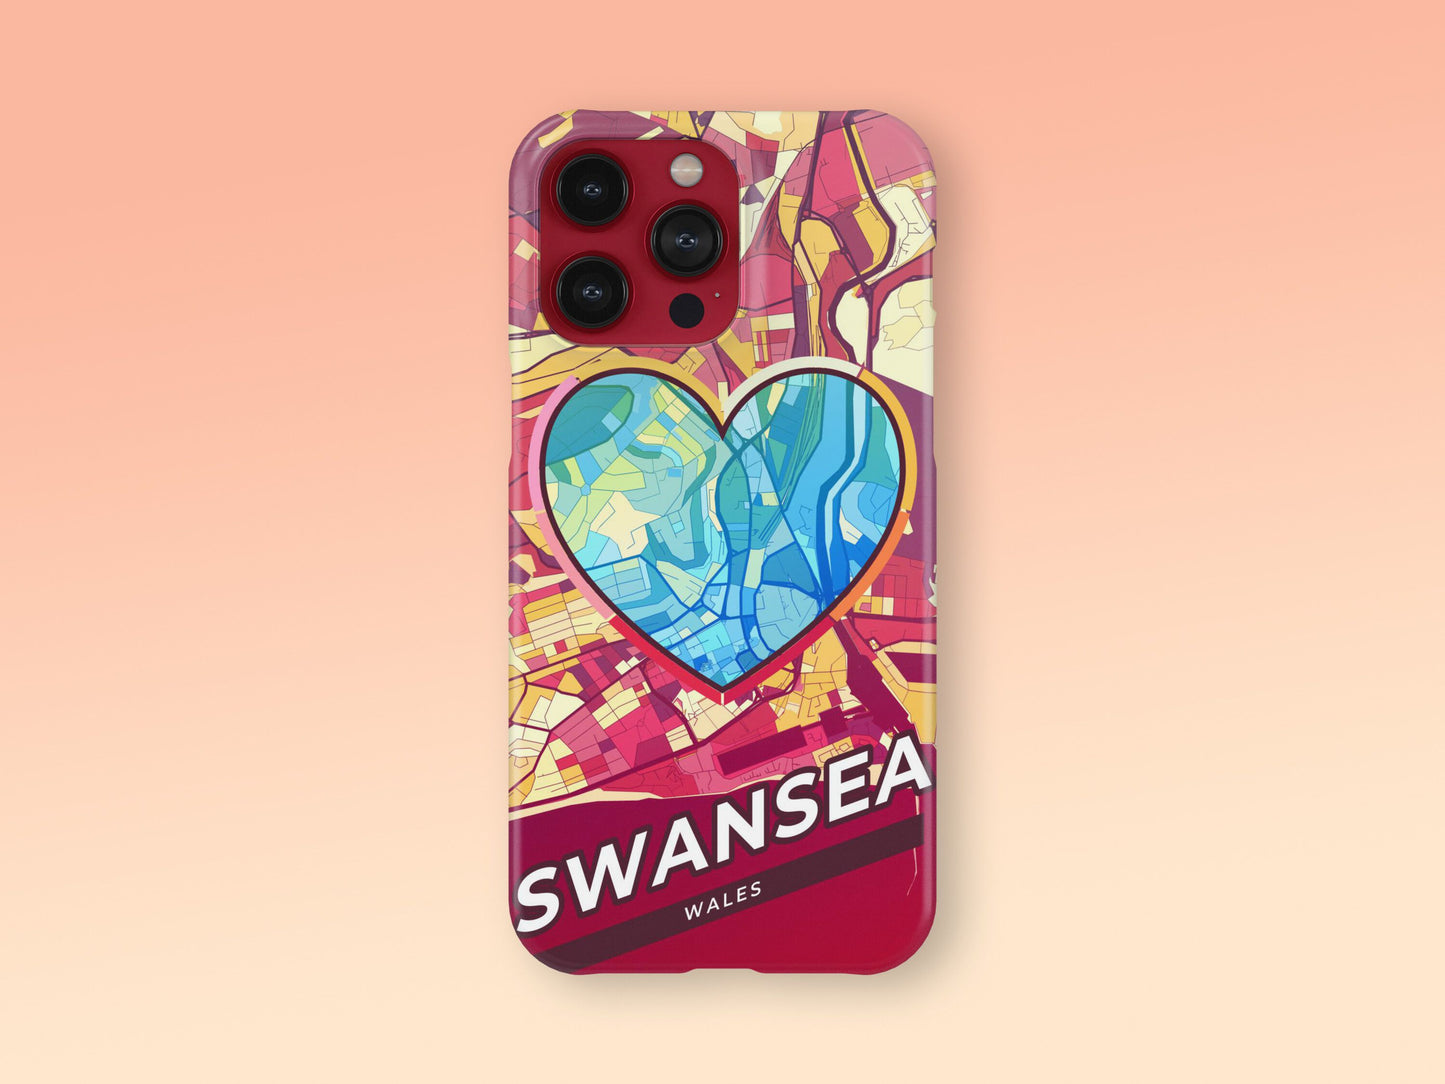 Swansea Wales slim phone case with colorful icon 2